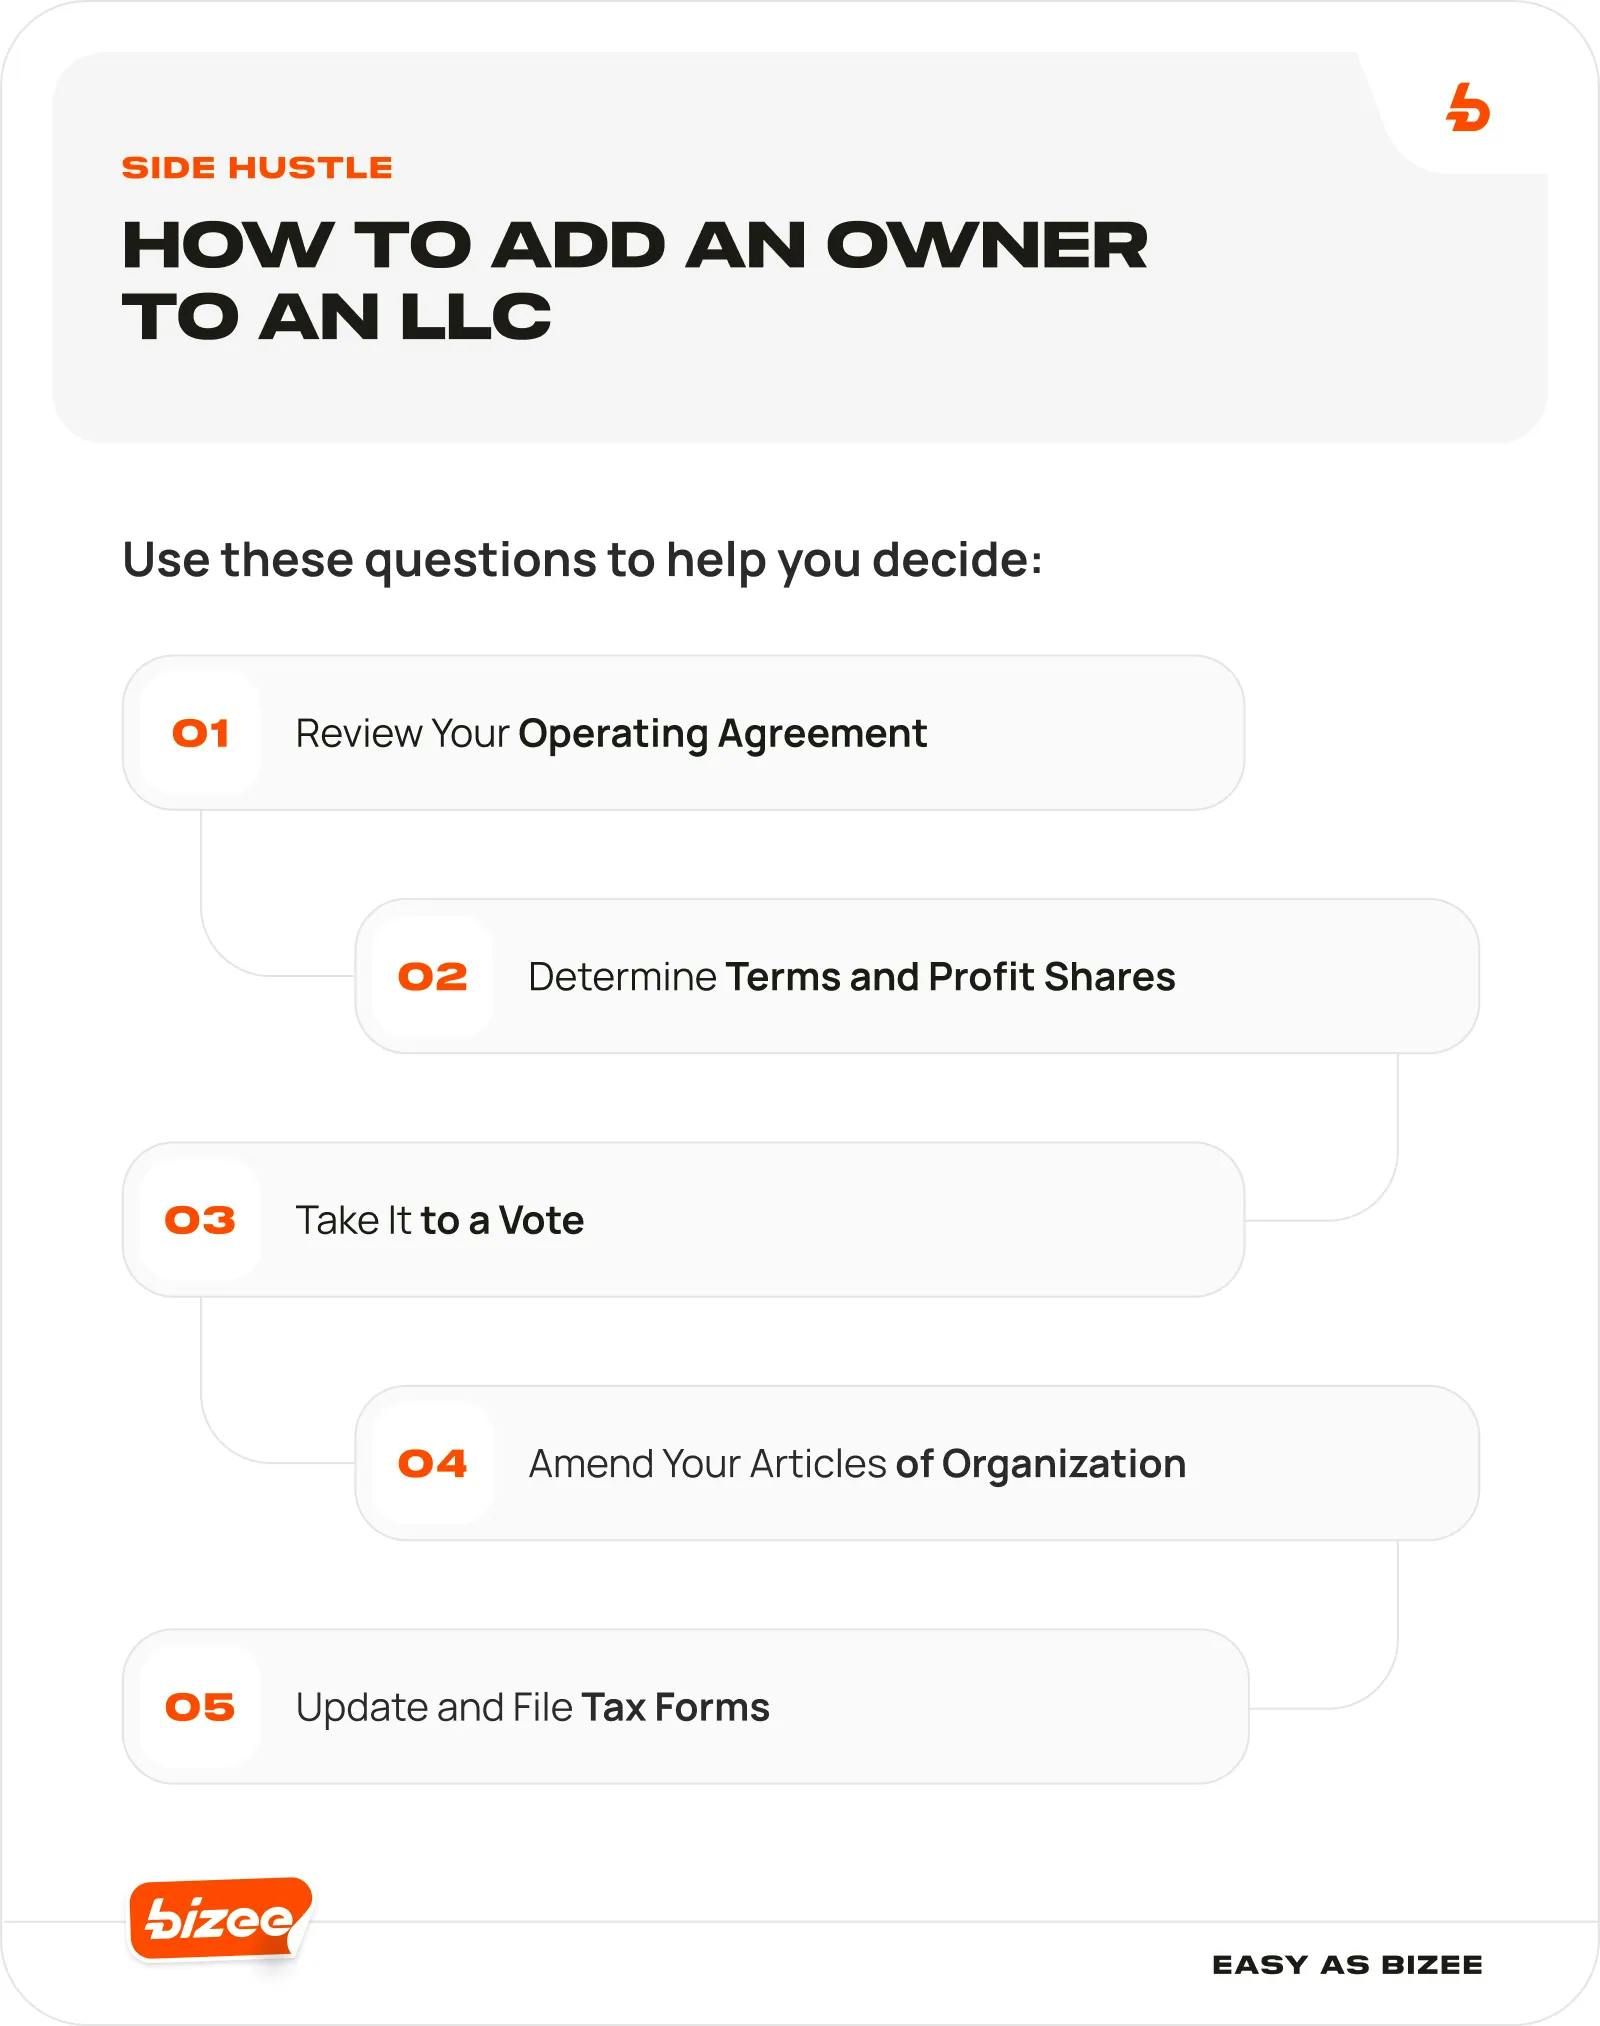 How to add an owner to an LLC - infographic